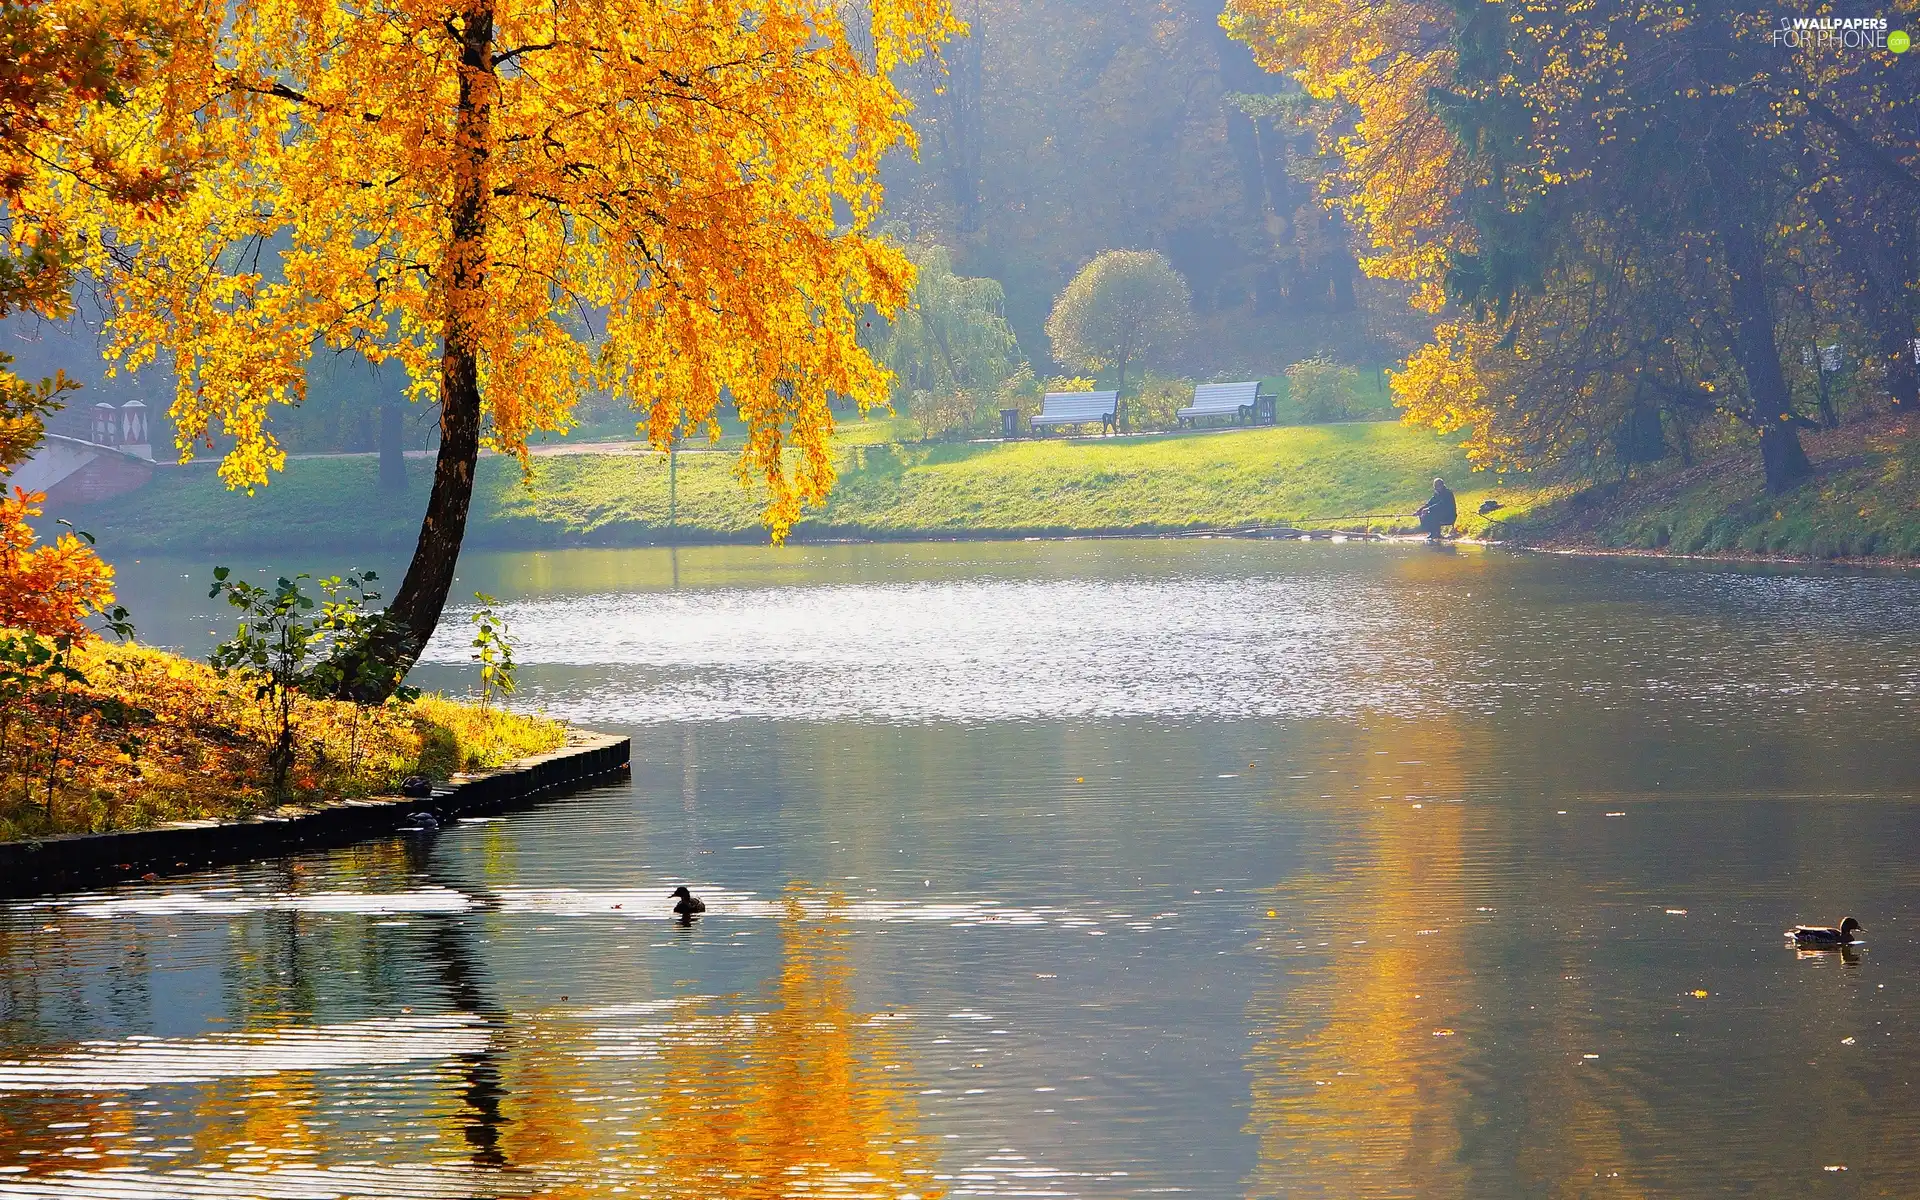 ducks, Park, viewes, autumn, trees, water